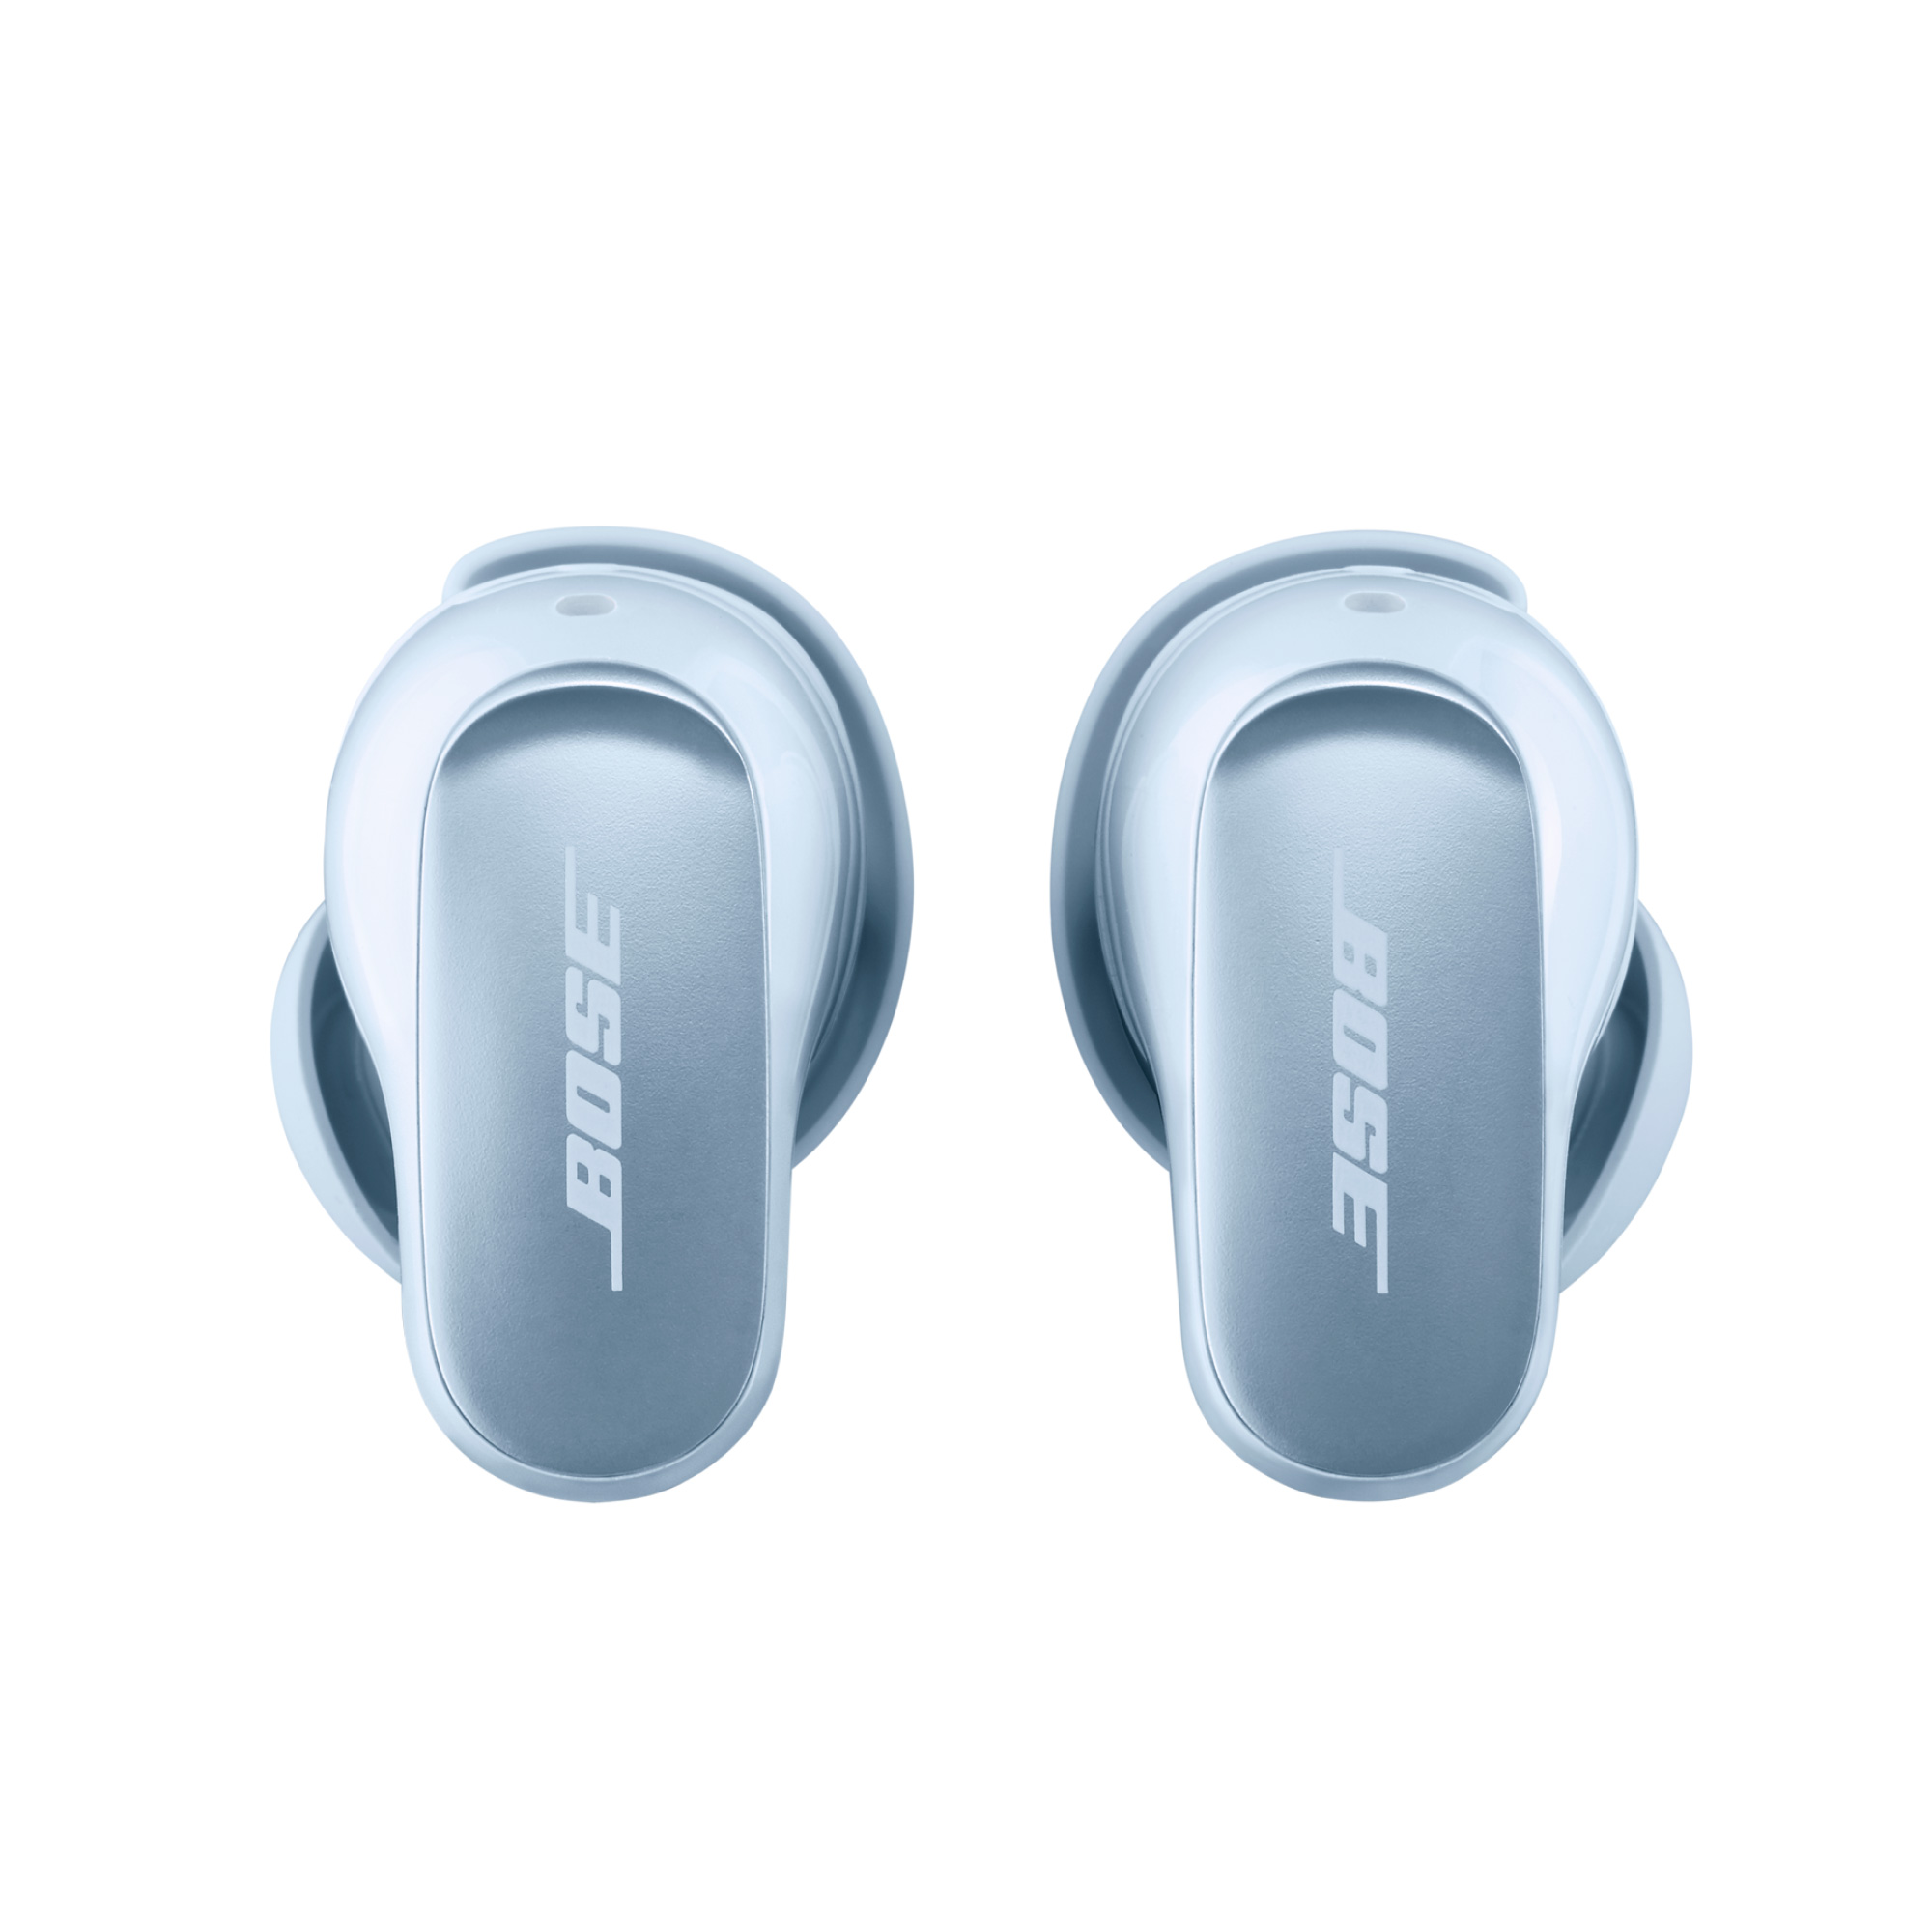 Bose QuietComfort Ultra Wireless Earbuds, Noise Cancelling Bluetooth Headphones, Moonstone Blue - image 3 of 8